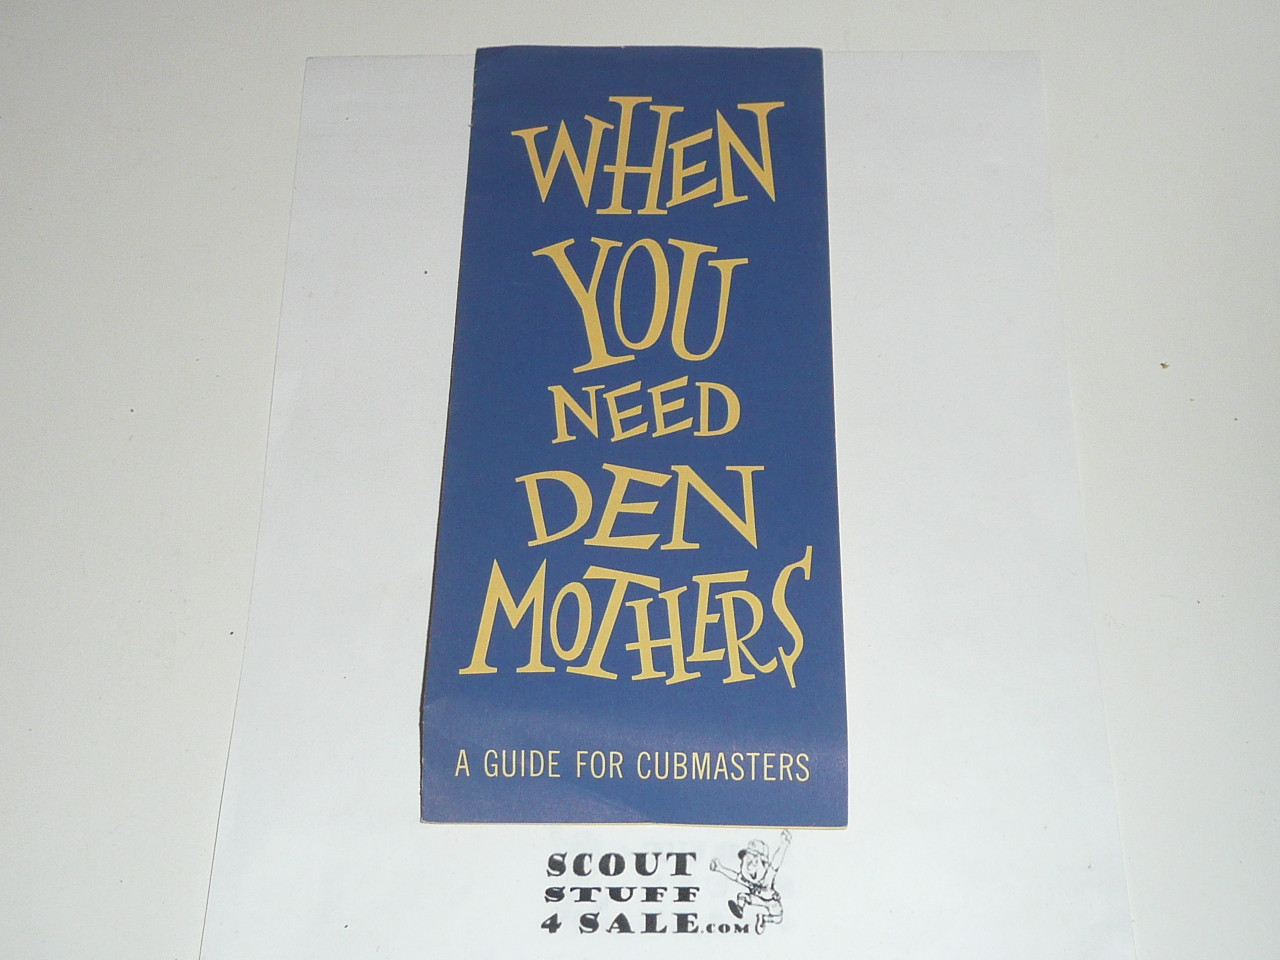 1964 When you need Den Mothers, A guide for Cubmasters, 8-64 printing